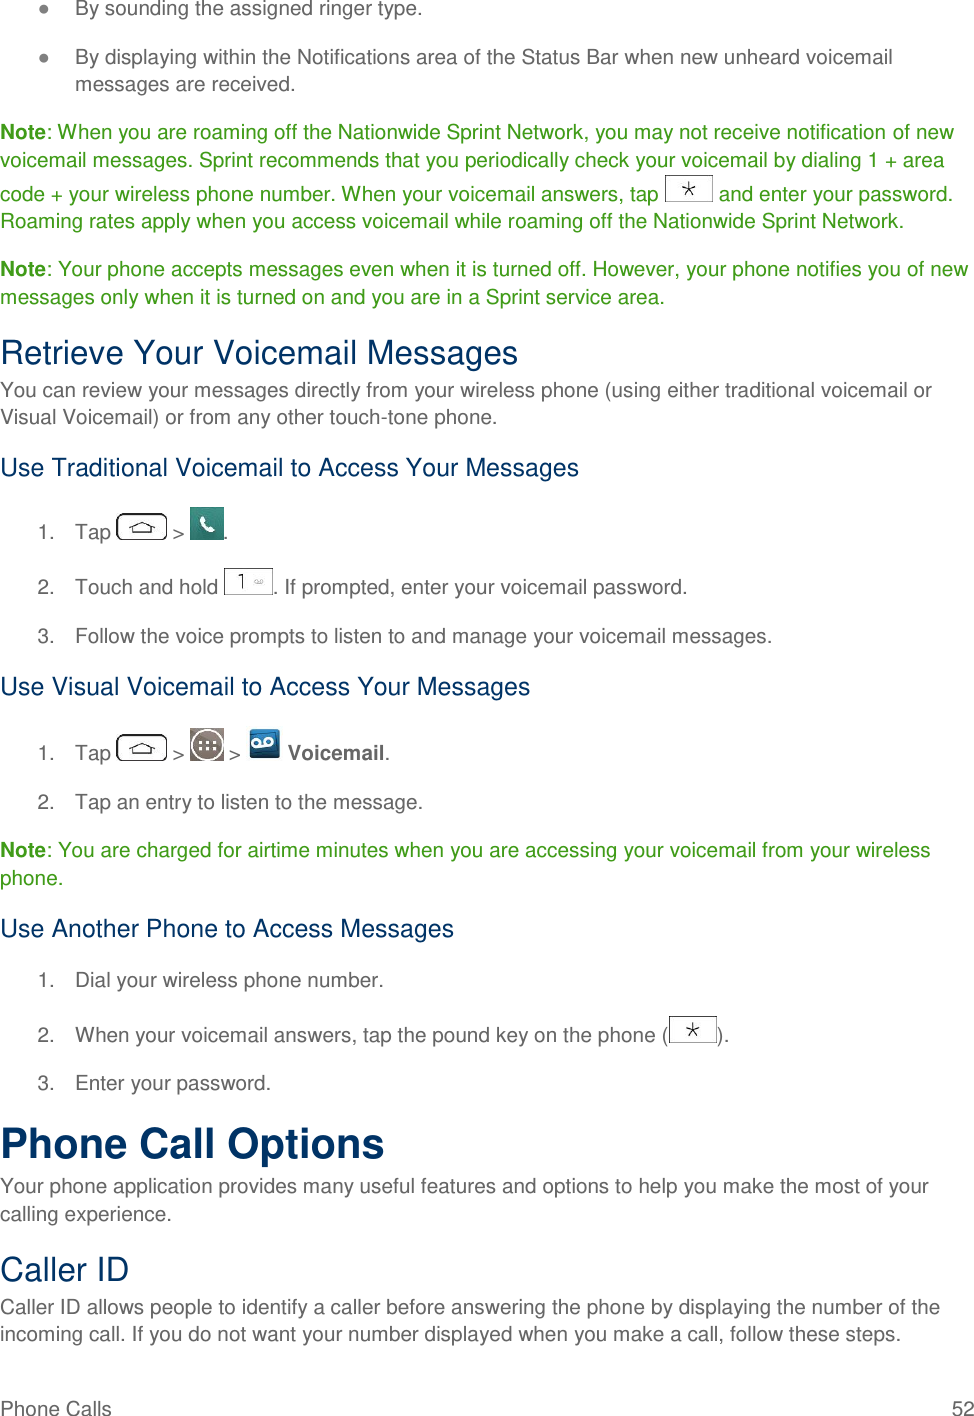 Phone Calls  52 ● By sounding the assigned ringer type. ● By displaying within the Notifications area of the Status Bar when new unheard voicemail messages are received. Note: When you are roaming off the Nationwide Sprint Network, you may not receive notification of new voicemail messages. Sprint recommends that you periodically check your voicemail by dialing 1 + area code + your wireless phone number. When your voicemail answers, tap   and enter your password. Roaming rates apply when you access voicemail while roaming off the Nationwide Sprint Network. Note: Your phone accepts messages even when it is turned off. However, your phone notifies you of new messages only when it is turned on and you are in a Sprint service area. Retrieve Your Voicemail Messages You can review your messages directly from your wireless phone (using either traditional voicemail or Visual Voicemail) or from any other touch-tone phone. Use Traditional Voicemail to Access Your Messages 1.  Tap   &gt;  . 2.  Touch and hold  . If prompted, enter your voicemail password. 3.  Follow the voice prompts to listen to and manage your voicemail messages. Use Visual Voicemail to Access Your Messages 1.  Tap   &gt;   &gt;   Voicemail. 2.  Tap an entry to listen to the message. Note: You are charged for airtime minutes when you are accessing your voicemail from your wireless phone. Use Another Phone to Access Messages 1.  Dial your wireless phone number. 2.  When your voicemail answers, tap the pound key on the phone ( ). 3.  Enter your password.  Phone Call Options Your phone application provides many useful features and options to help you make the most of your calling experience. Caller ID Caller ID allows people to identify a caller before answering the phone by displaying the number of the incoming call. If you do not want your number displayed when you make a call, follow these steps. 